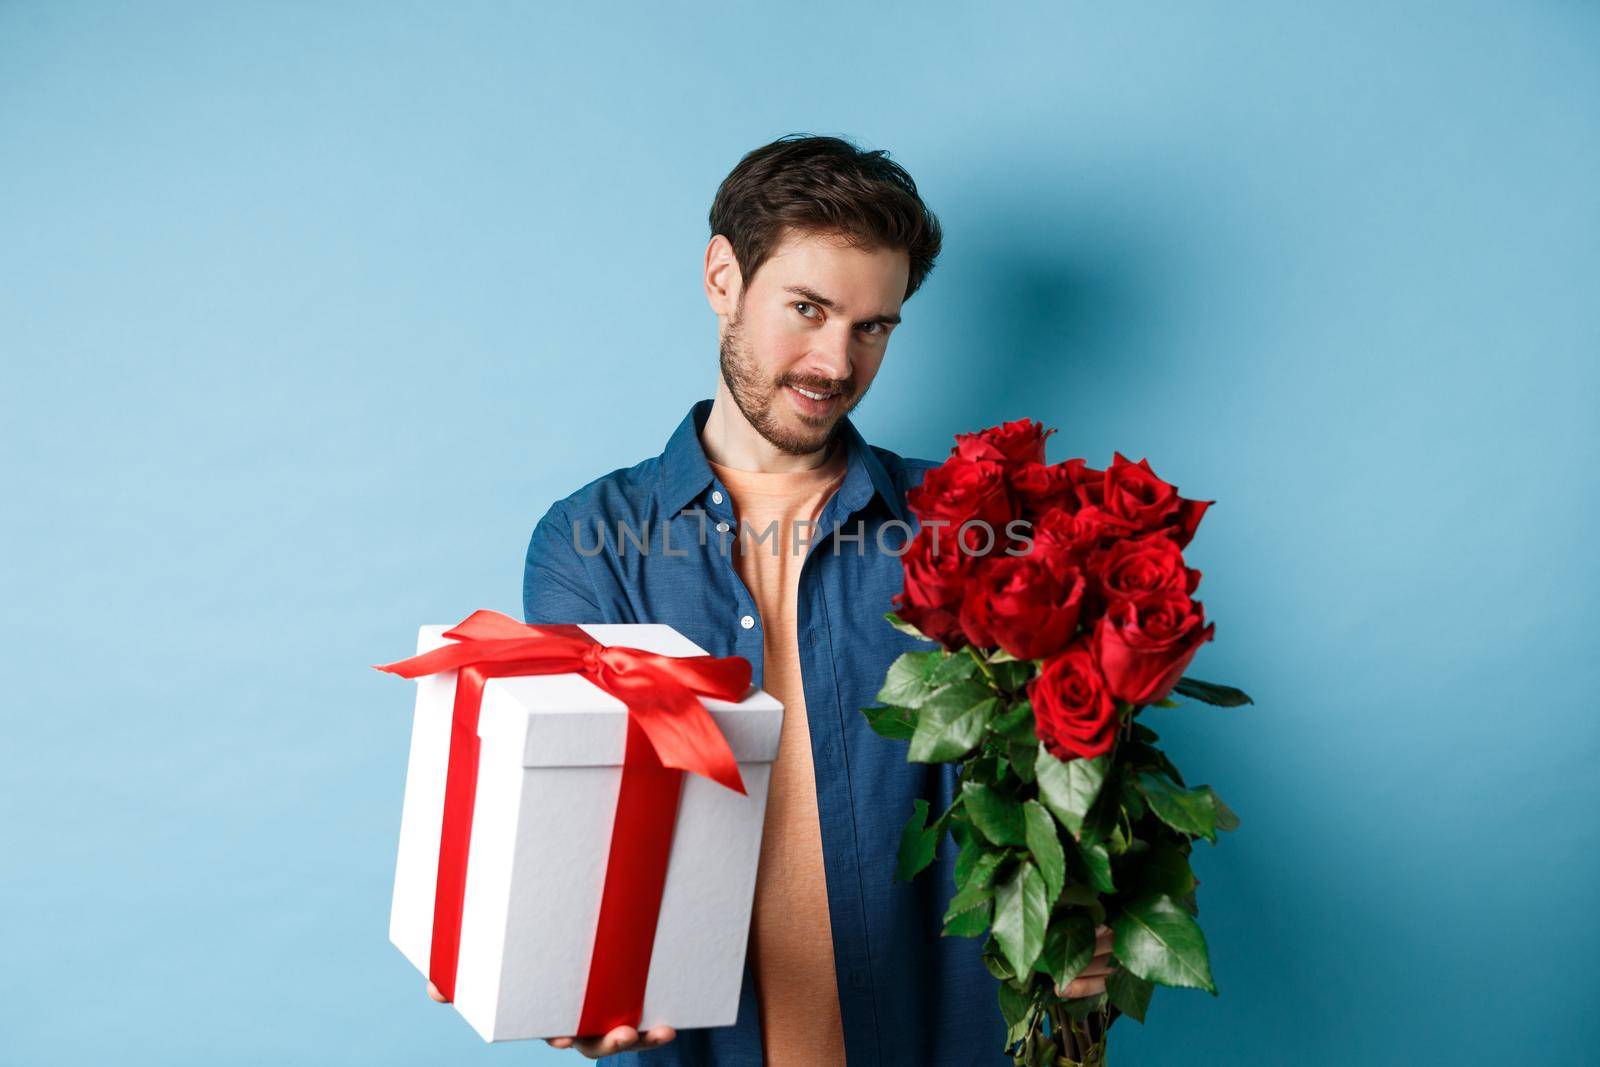 Love and Valentines day concept. Romantic man giving you gift box and bouquet of flowers on date, standing over blue background.